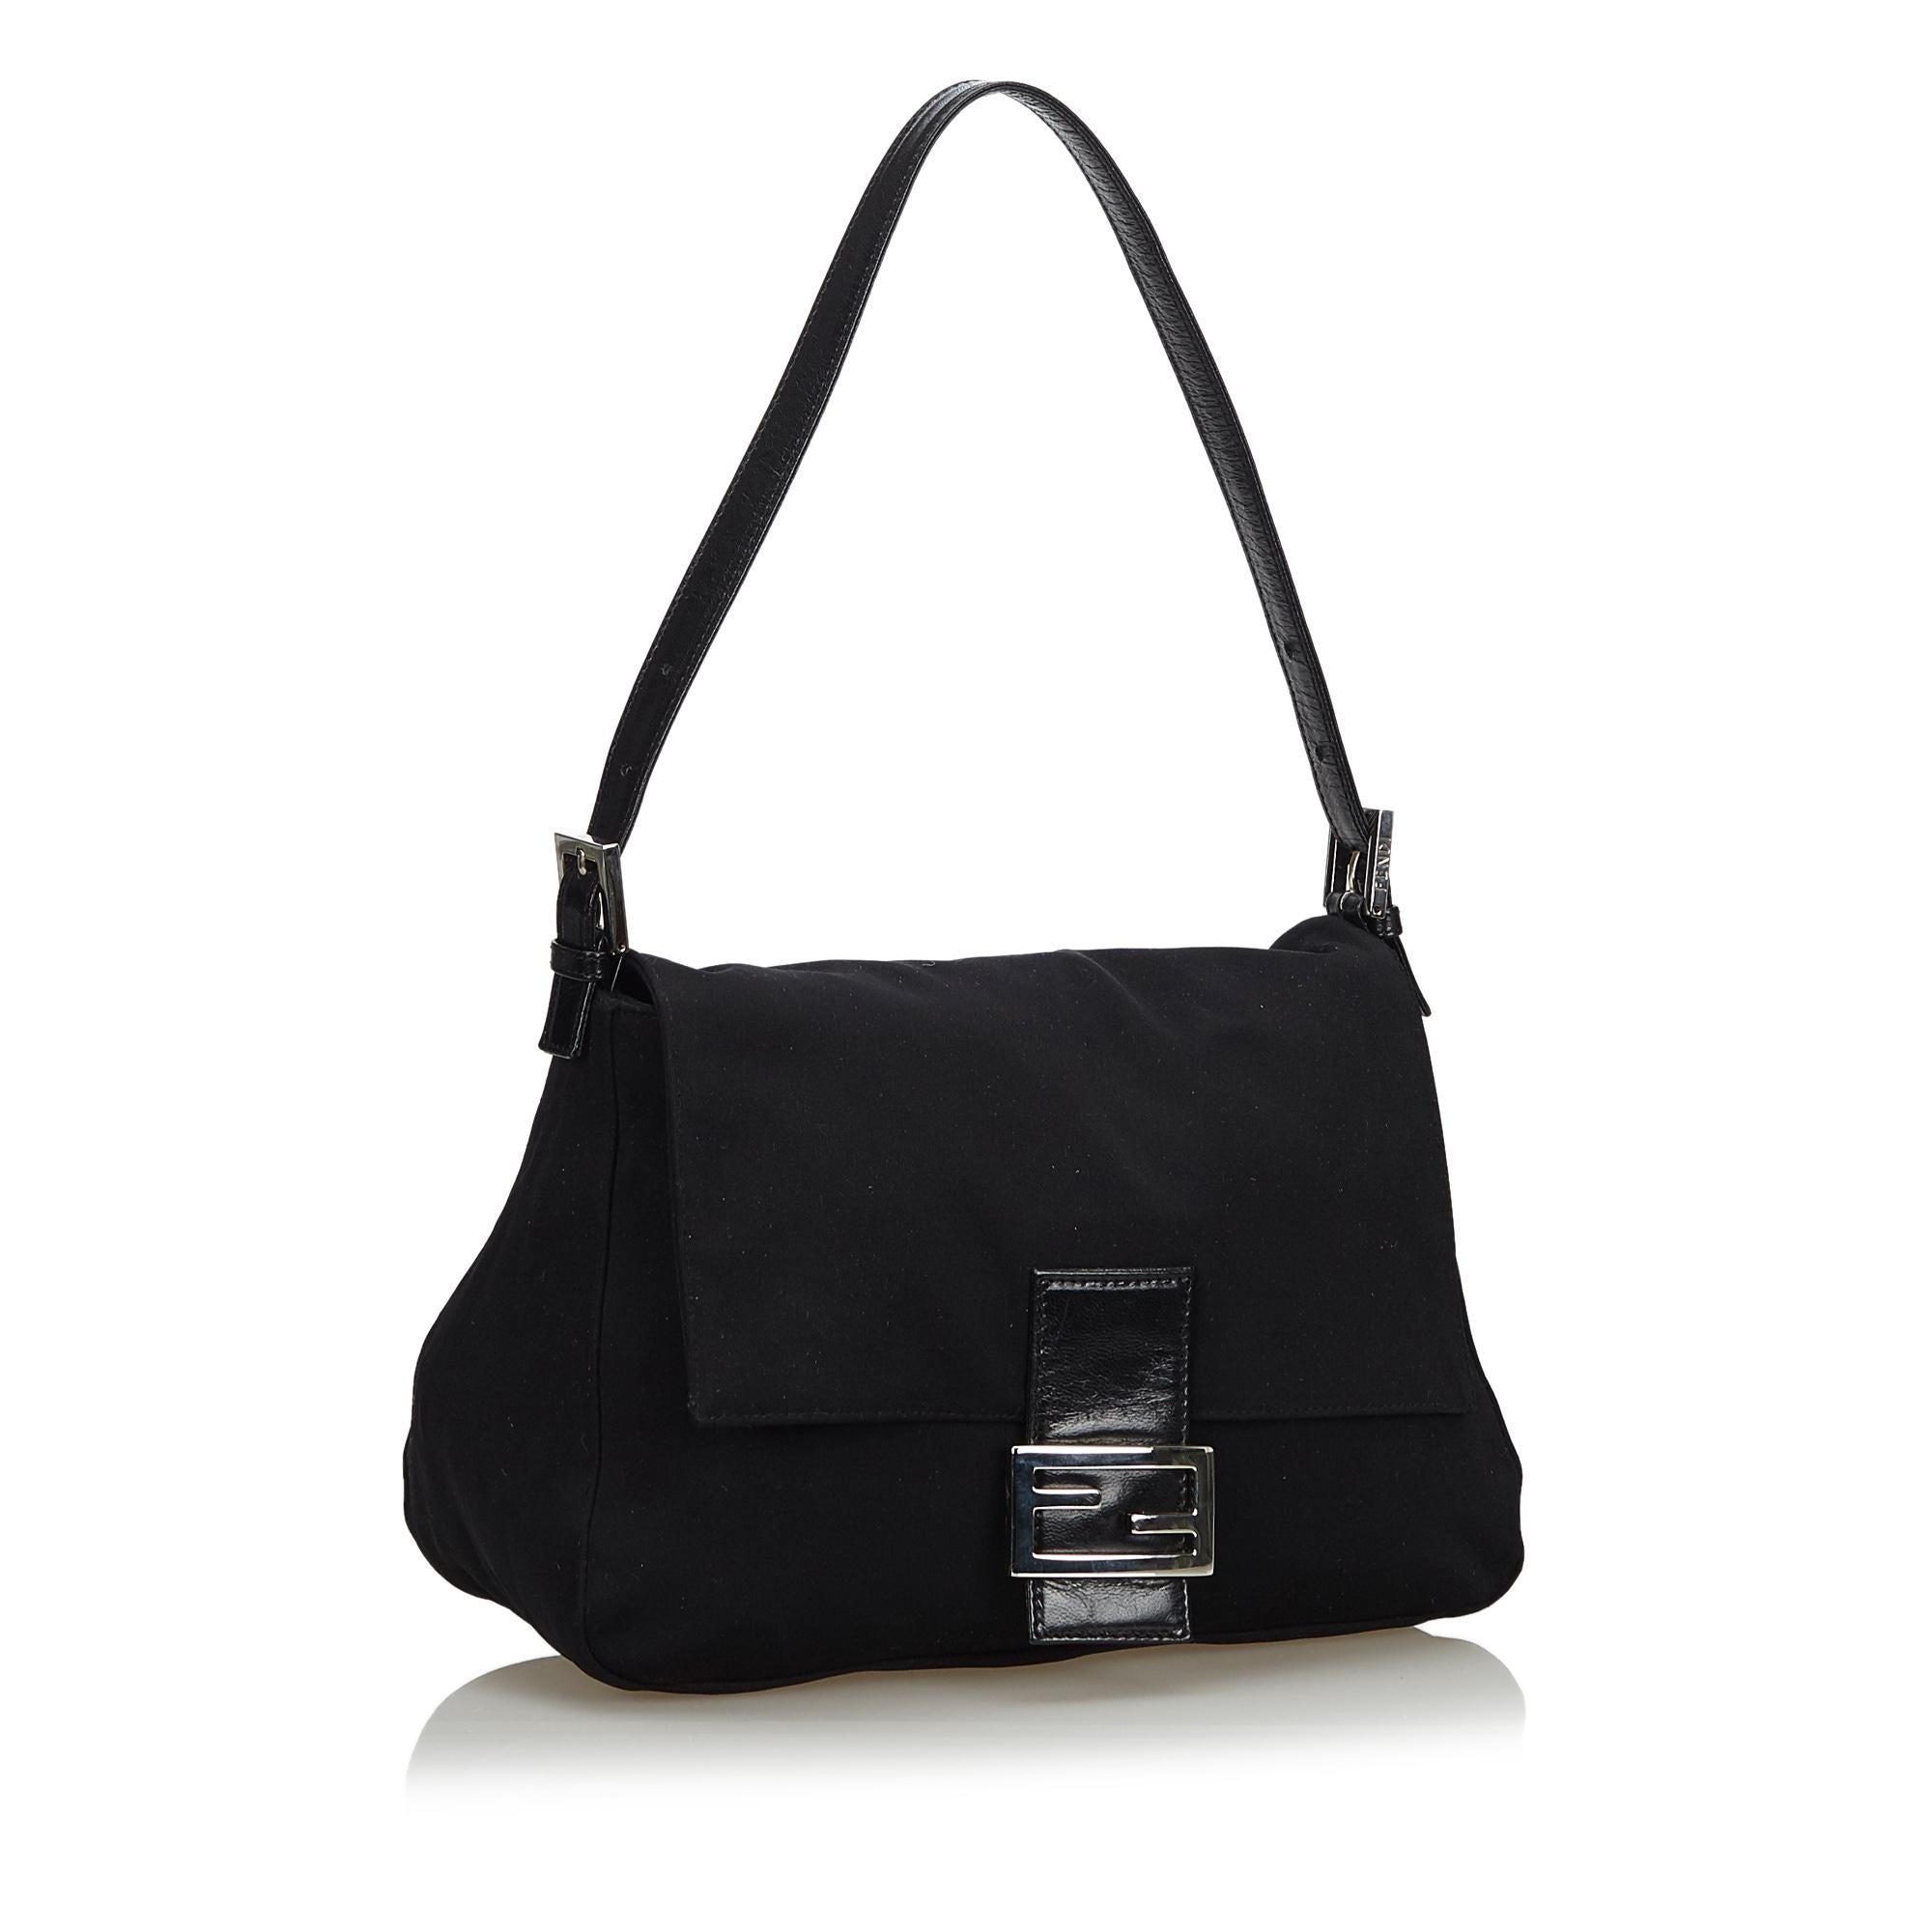 The Mamma Baguette shoulder bag features a cotton body, a flat leather strap, a top flap with a flat strap and magnetic closure, and an interior zip pocket. It carries as B+ condition rating.

Inclusions: 
Dust Bag

Dimensions:
Length: 19.00